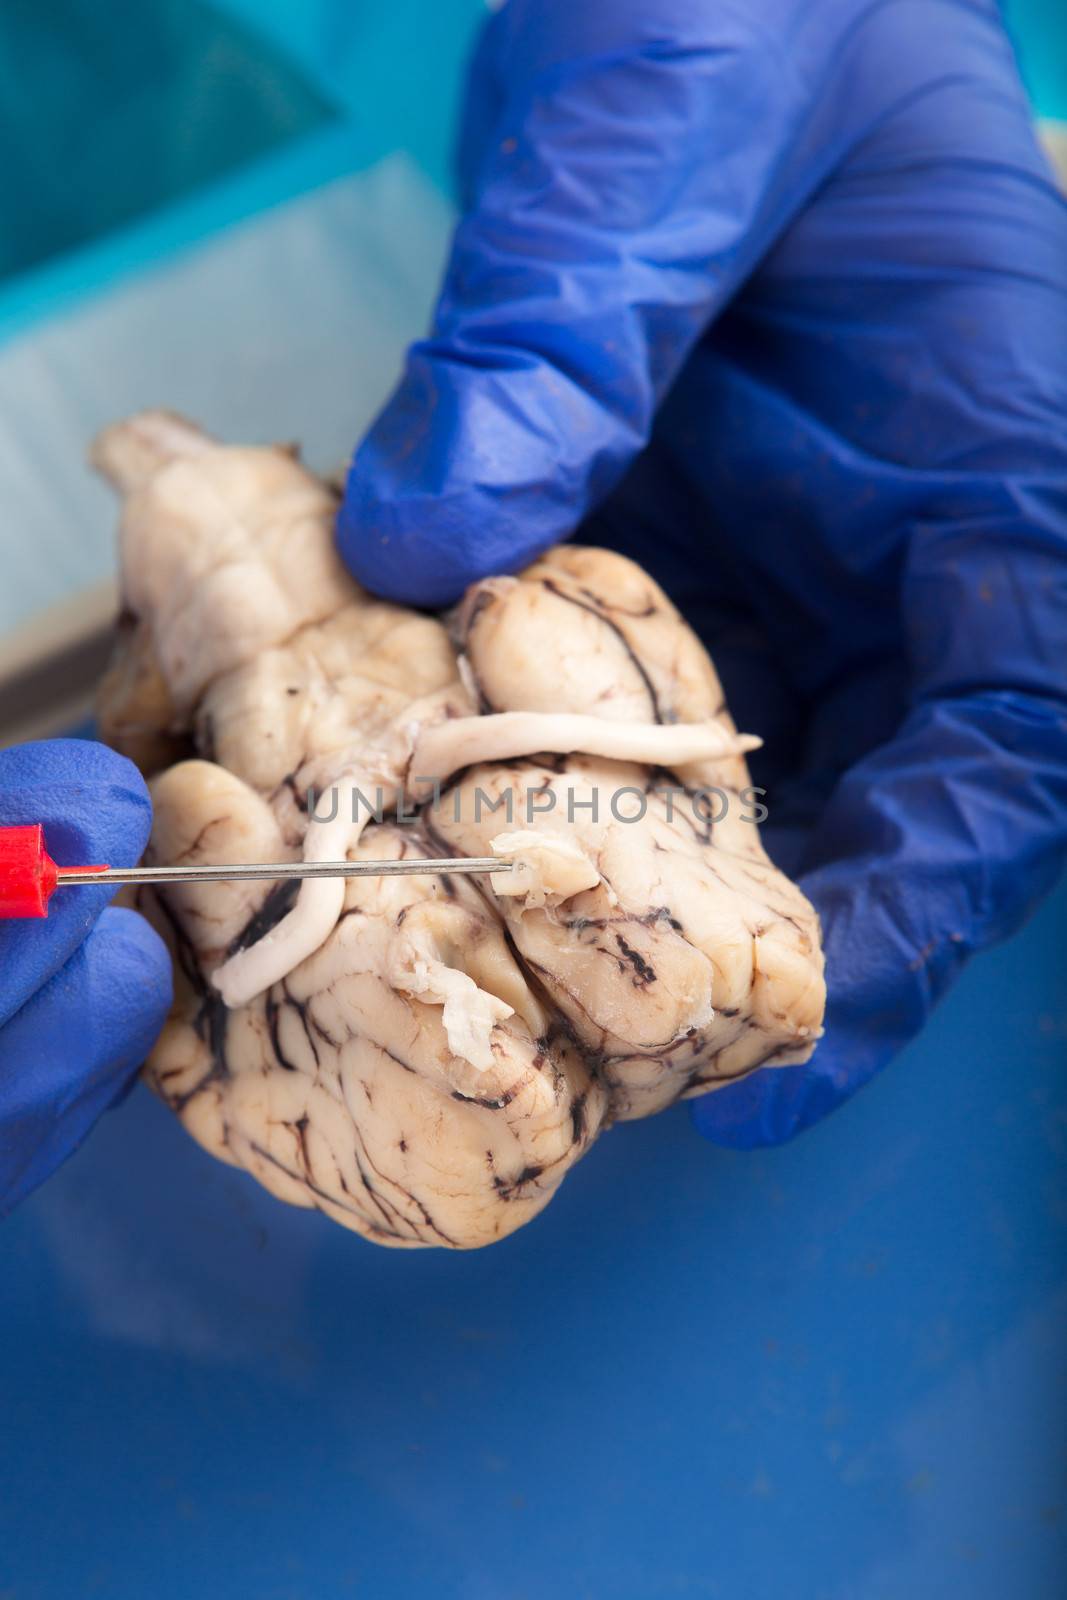 Physiology student examining a cow brain by coskun